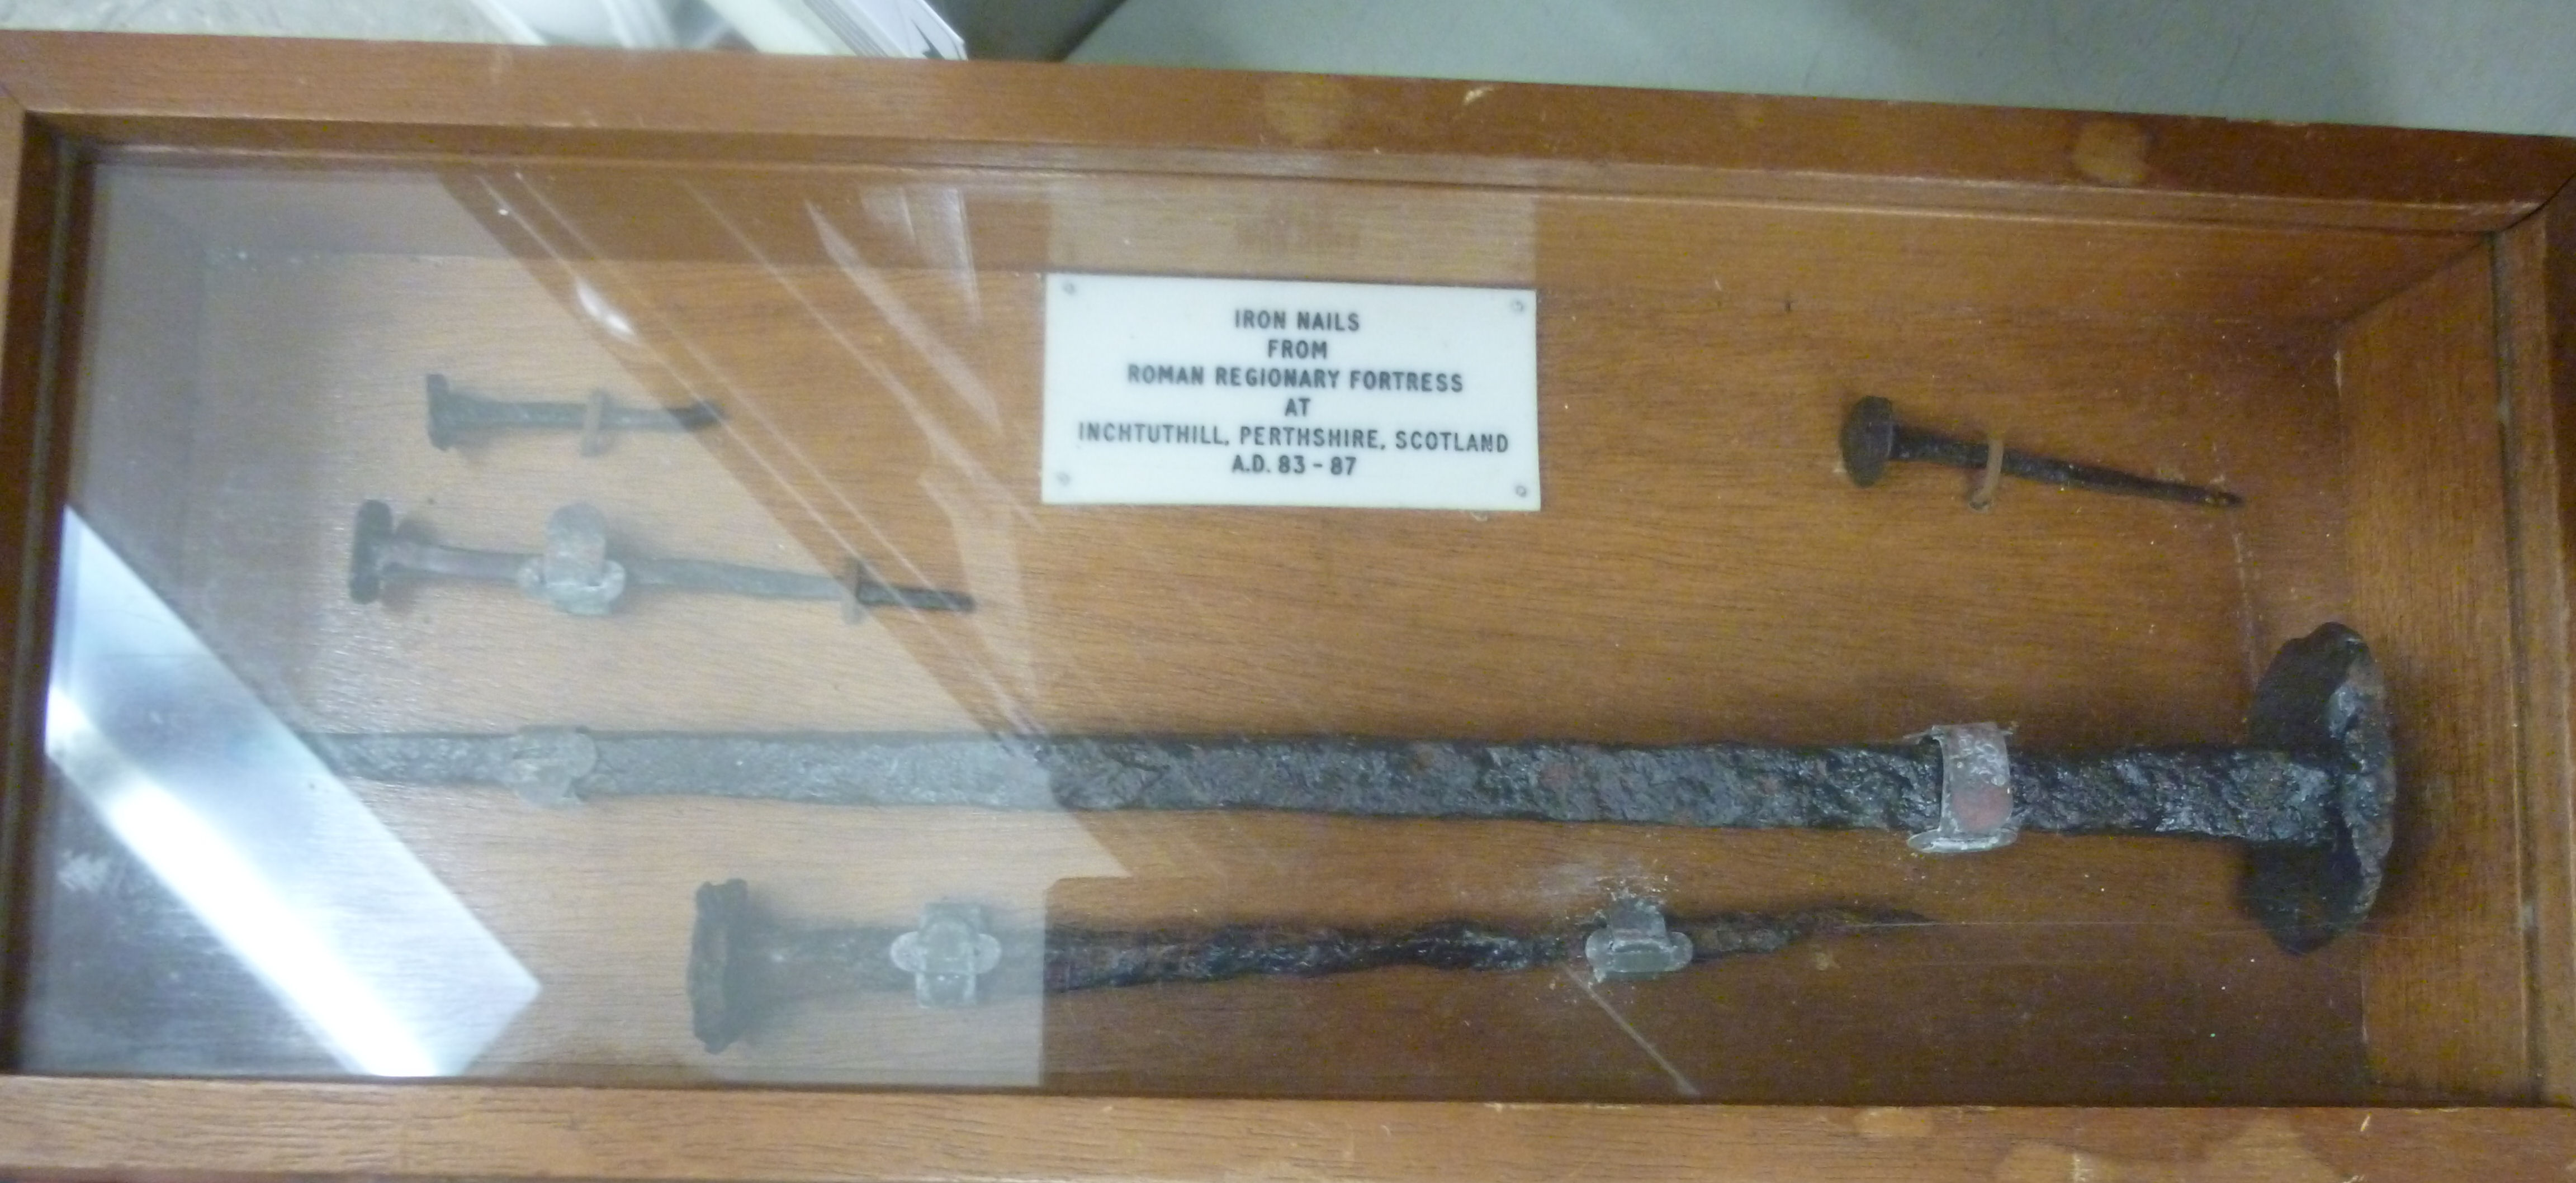 A display of iron nails purported to have come from a Roman Regionary Fortress at Inchtuthill,